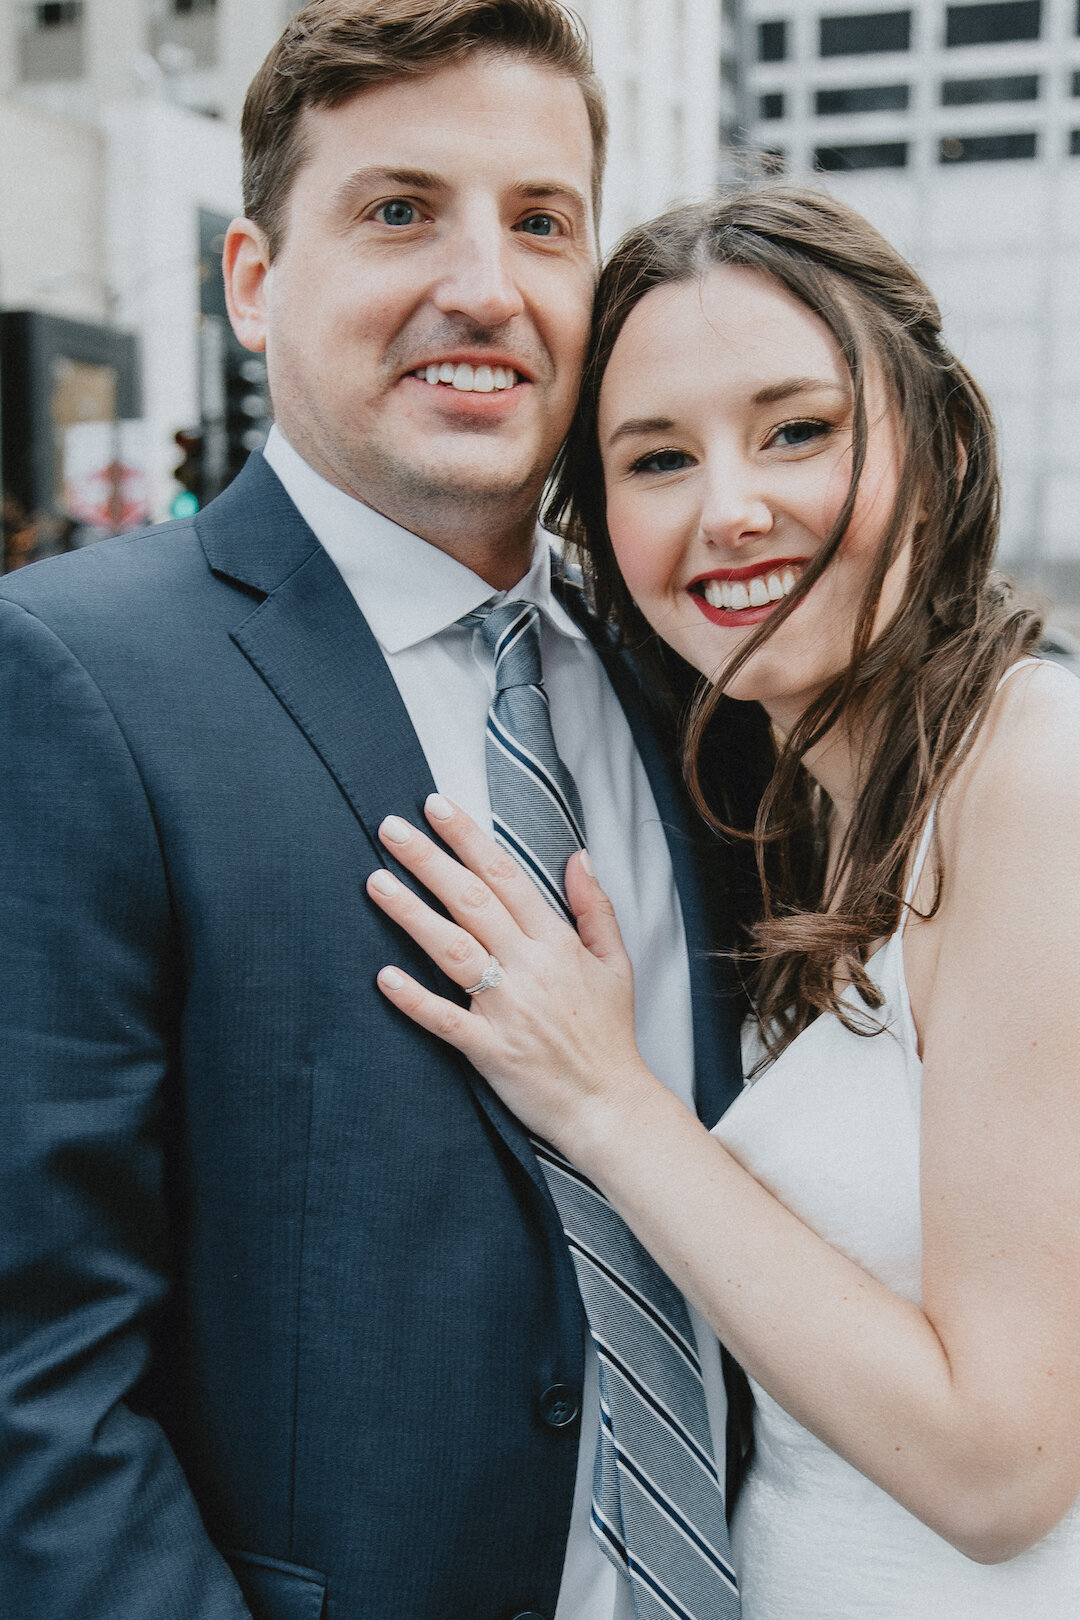 Elopement Celebration at The Drake Hotel captured by Nastasia Mora Photography featured on CHI thee WED